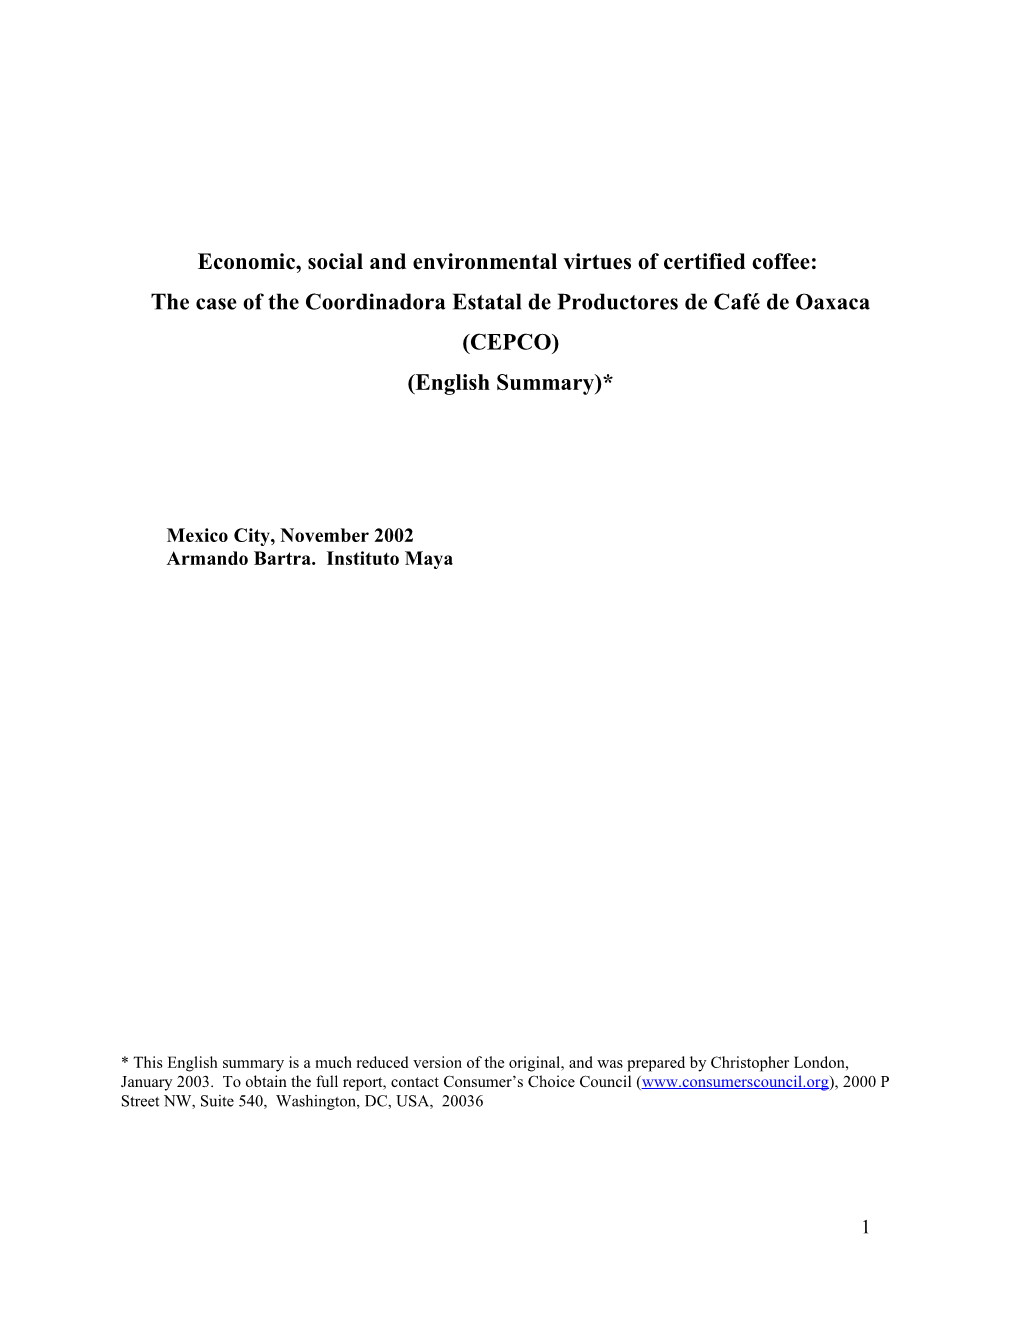 Economic, Social and Environmental Virtues of Certified Coffee